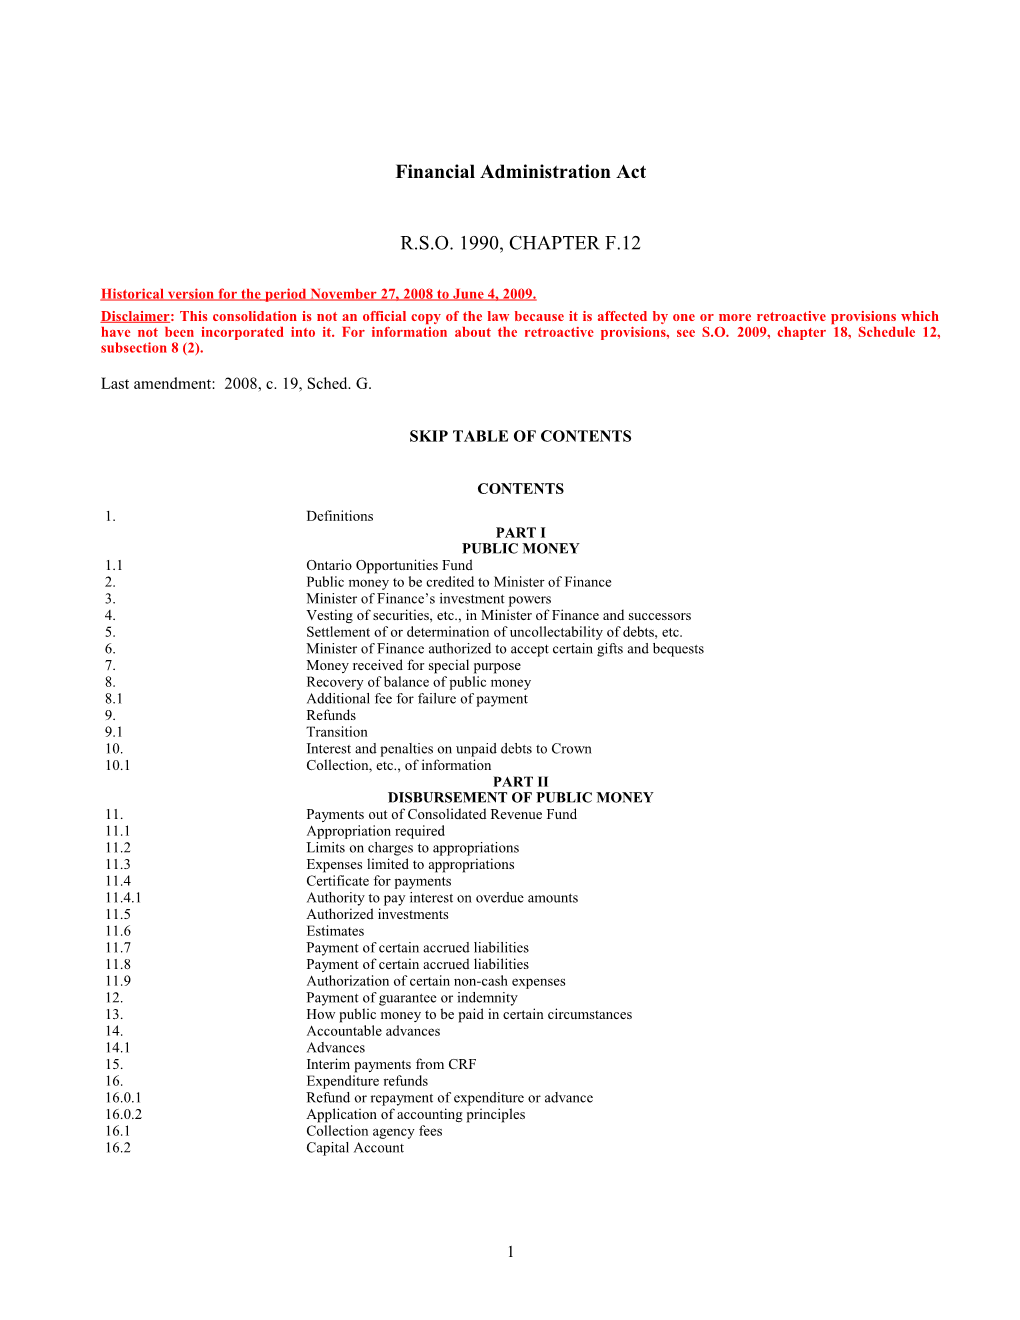 Financial Administration Act, R.S.O. 1990, C. F.12